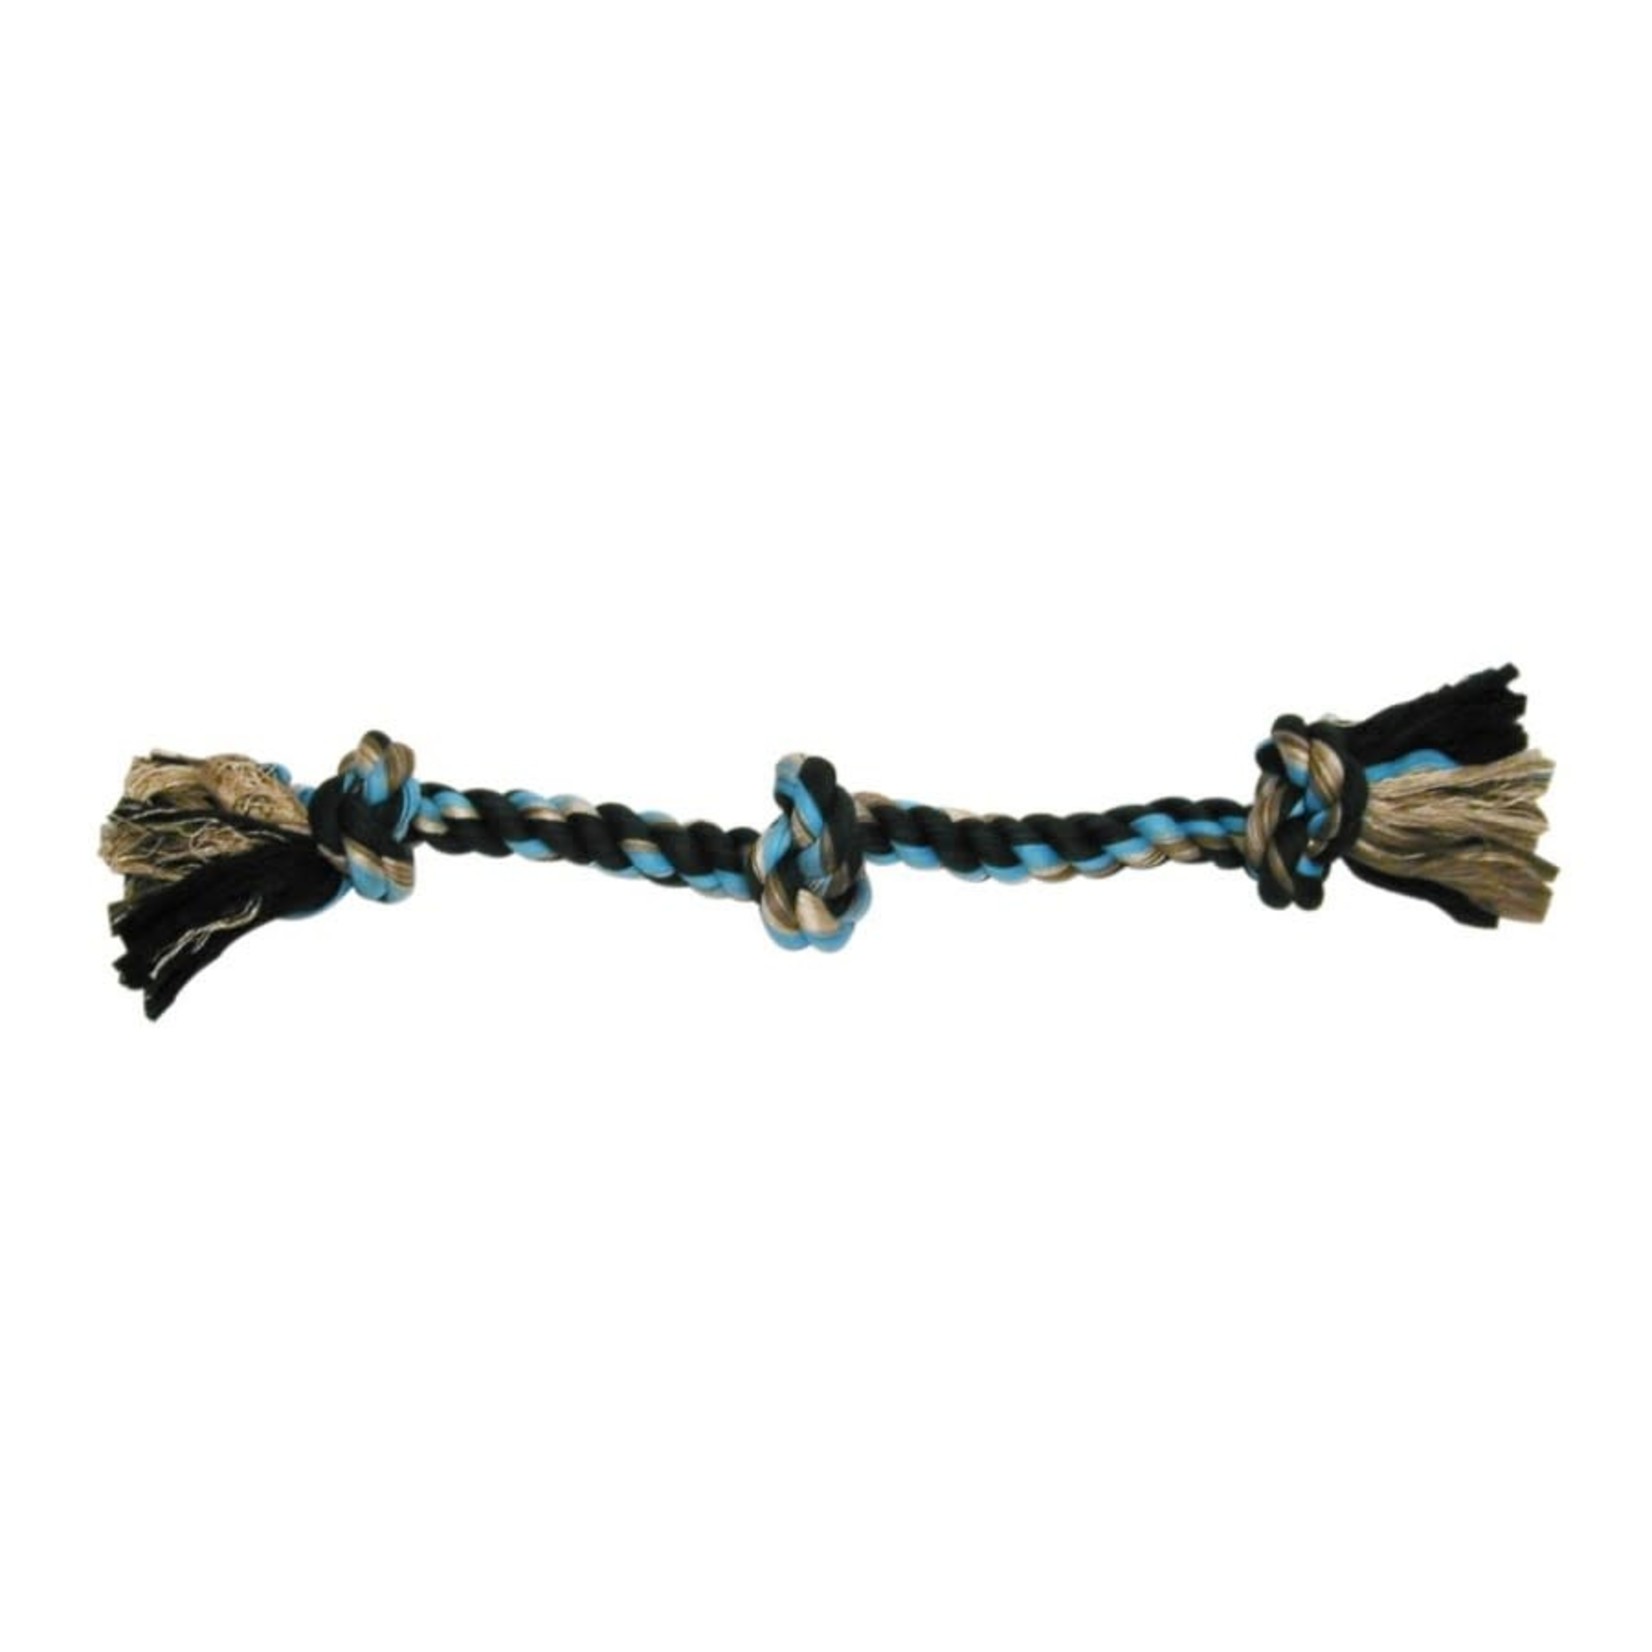 Flossy 3 Knot Tug Rope